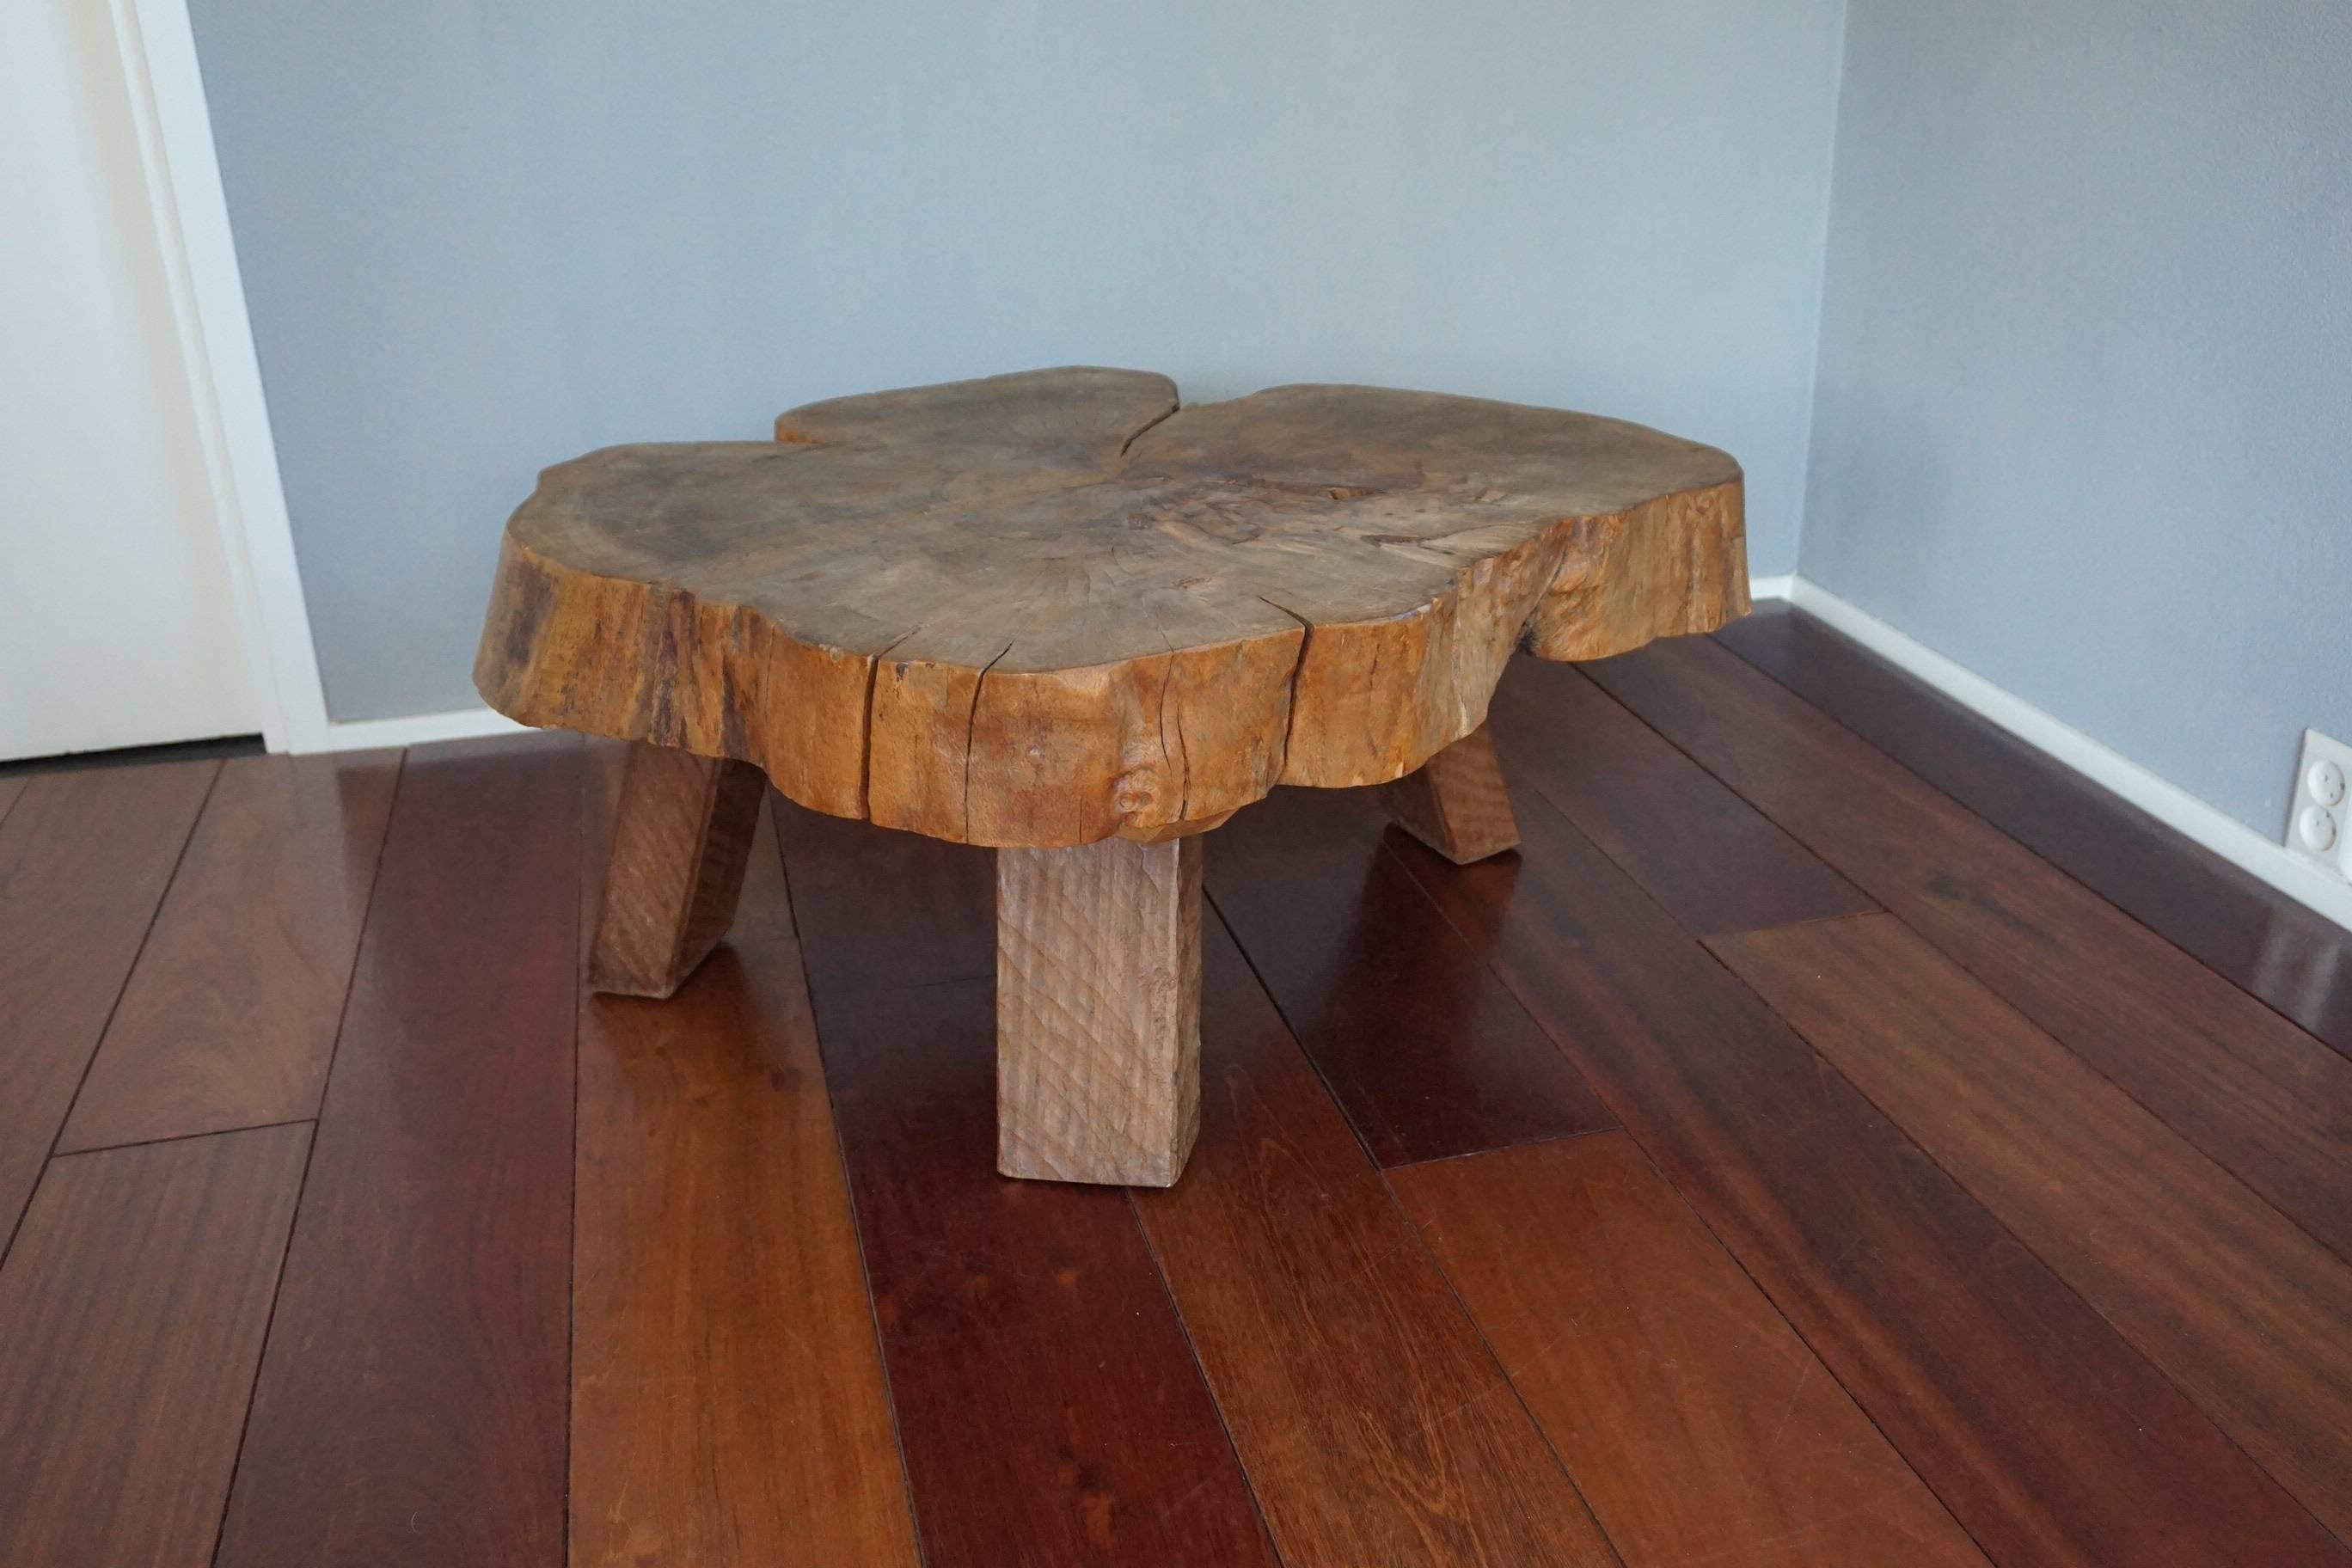 Rustic and great looking, natural materials table.

This all-natural tree trunk coffee table from circa 1960-1970 is a real eyecatcher and highly practical at the same time. Both in diameter and in height this could be thé perfect coffee table in